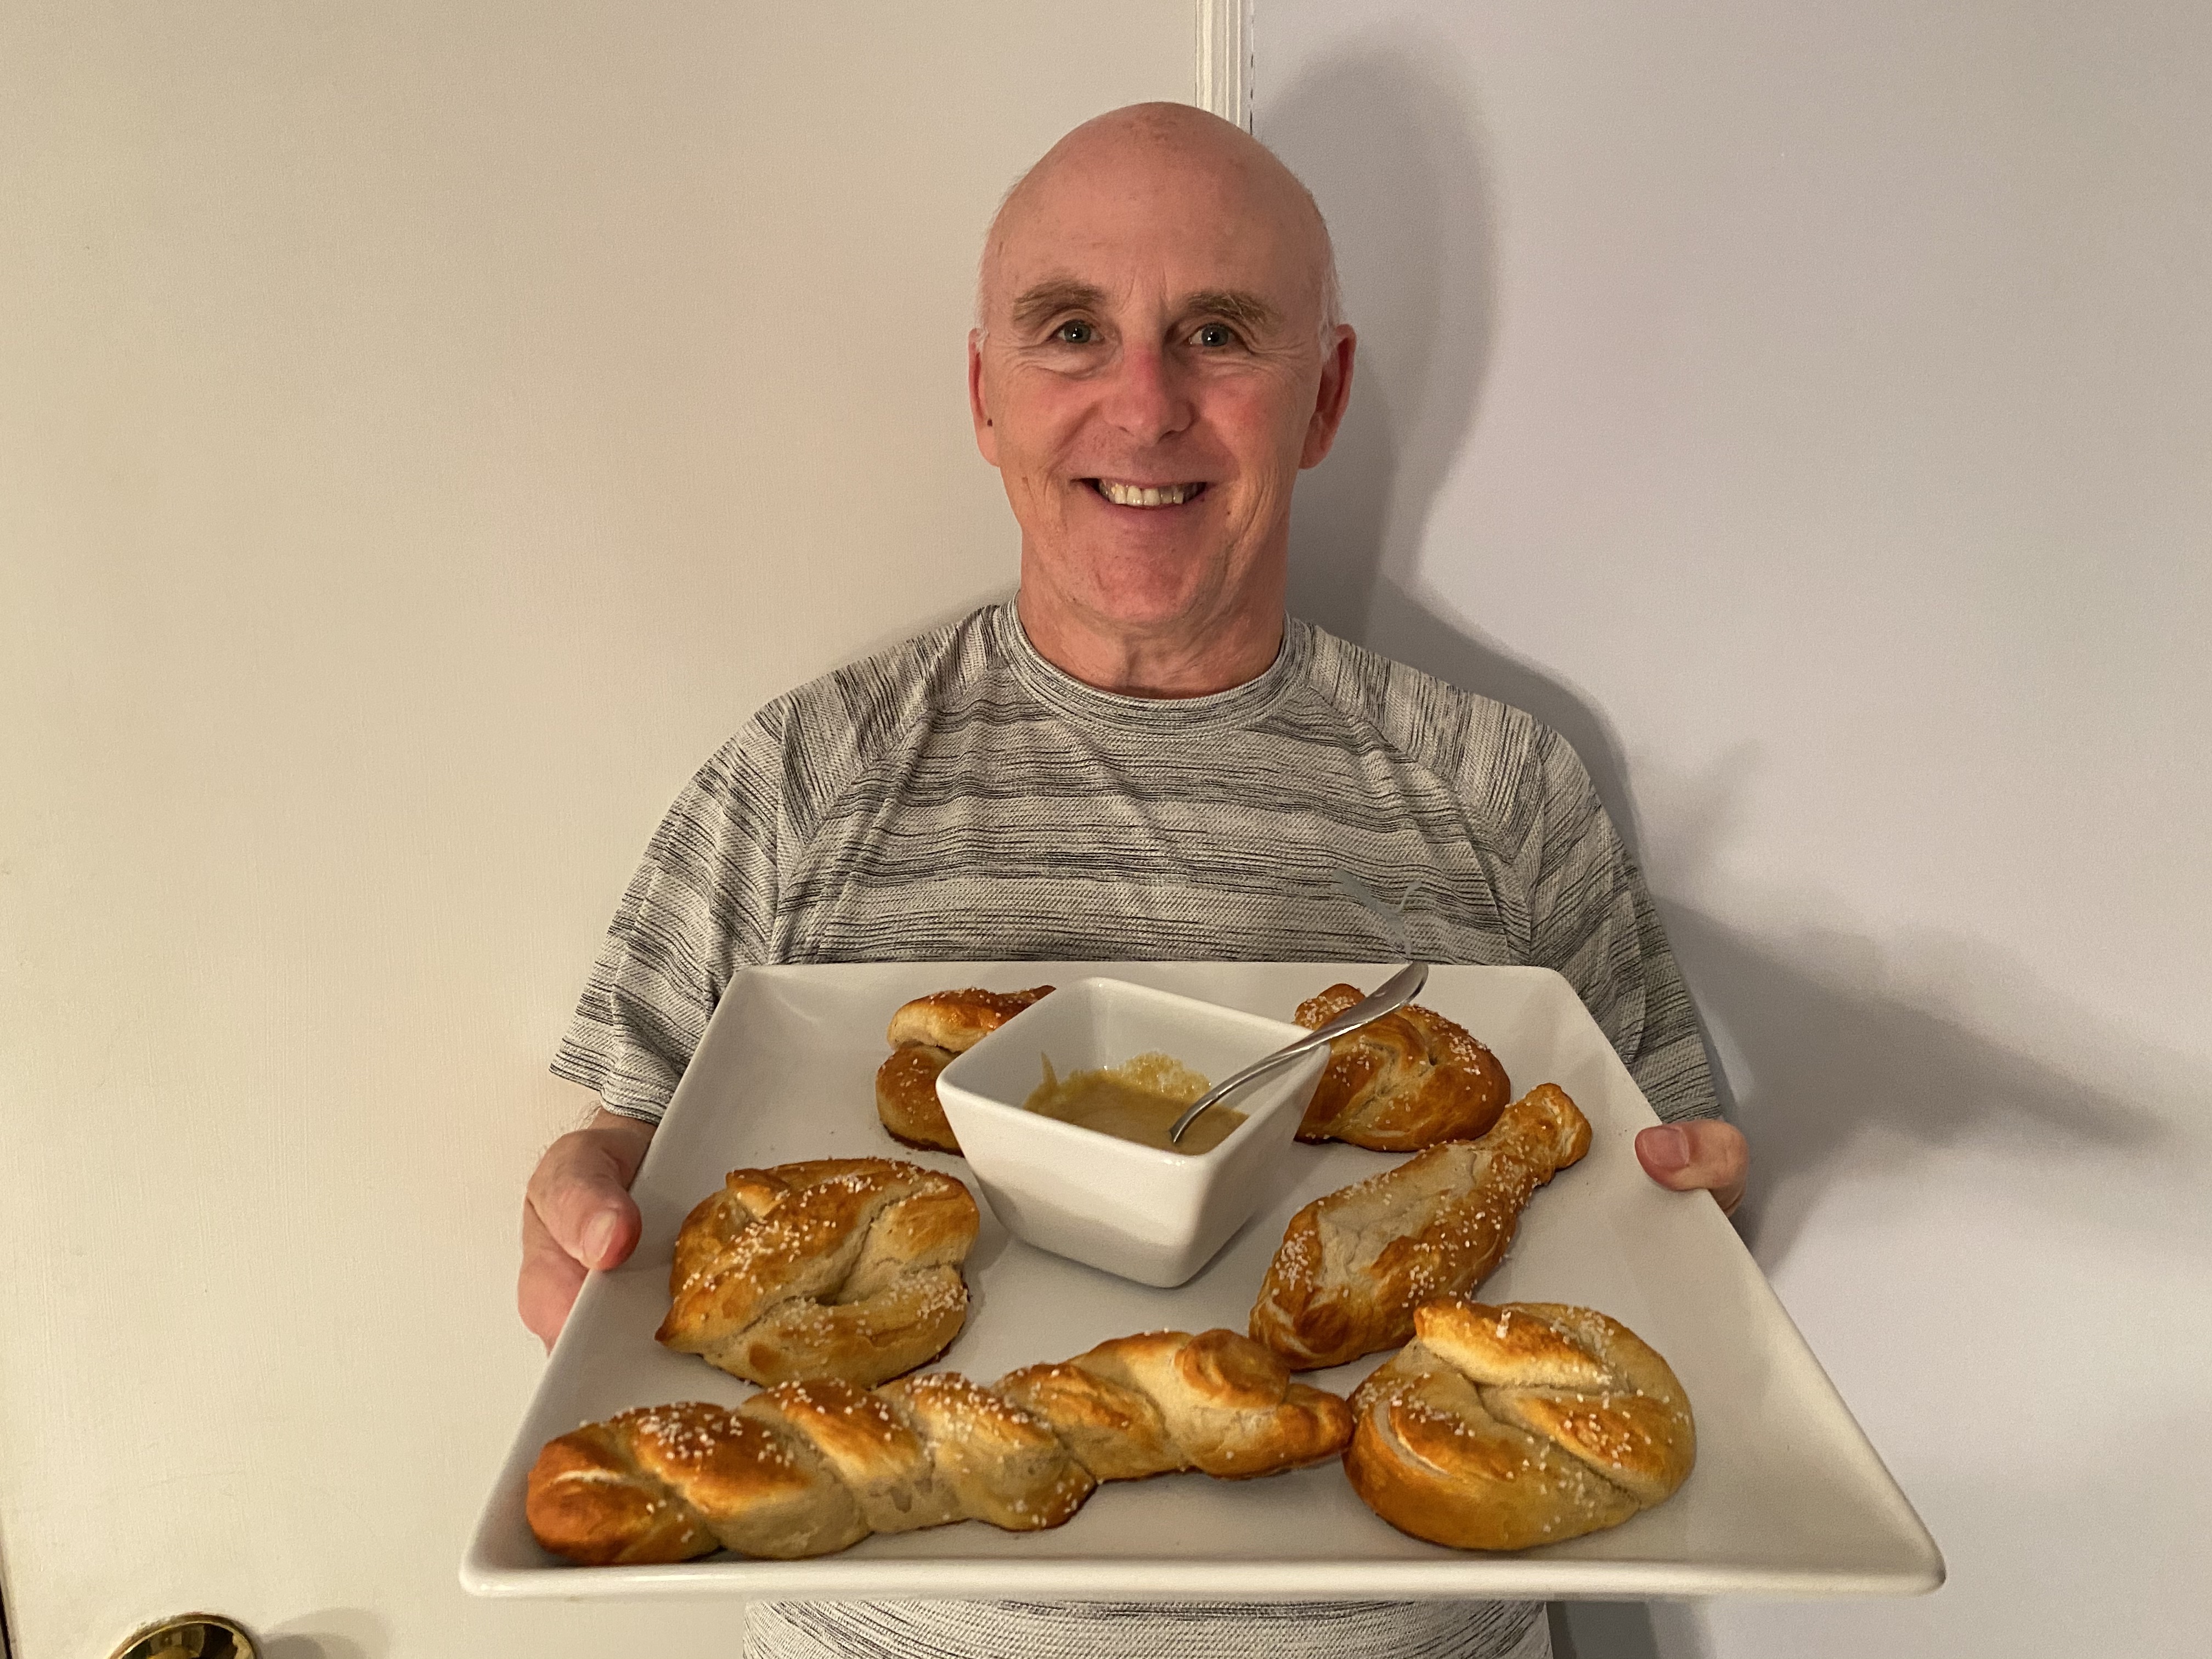 Chef Rob holding a plate of soft pretzels.